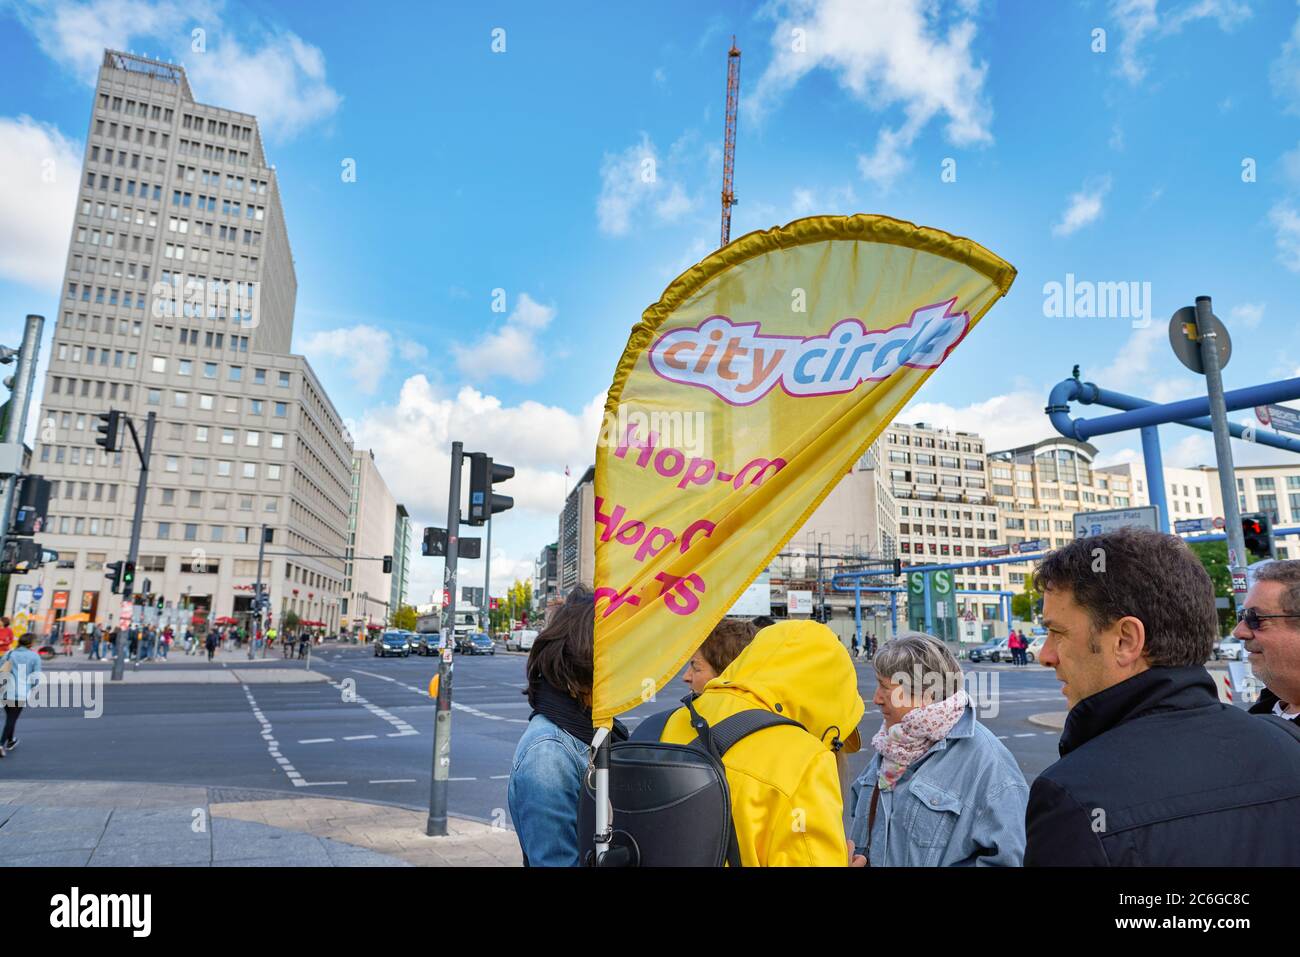 BERLIN, GERMANY - CIRCA SEPTEMBER, 2019: Berlin City Circle sign seen in Berlin in the daytime. Stock Photo